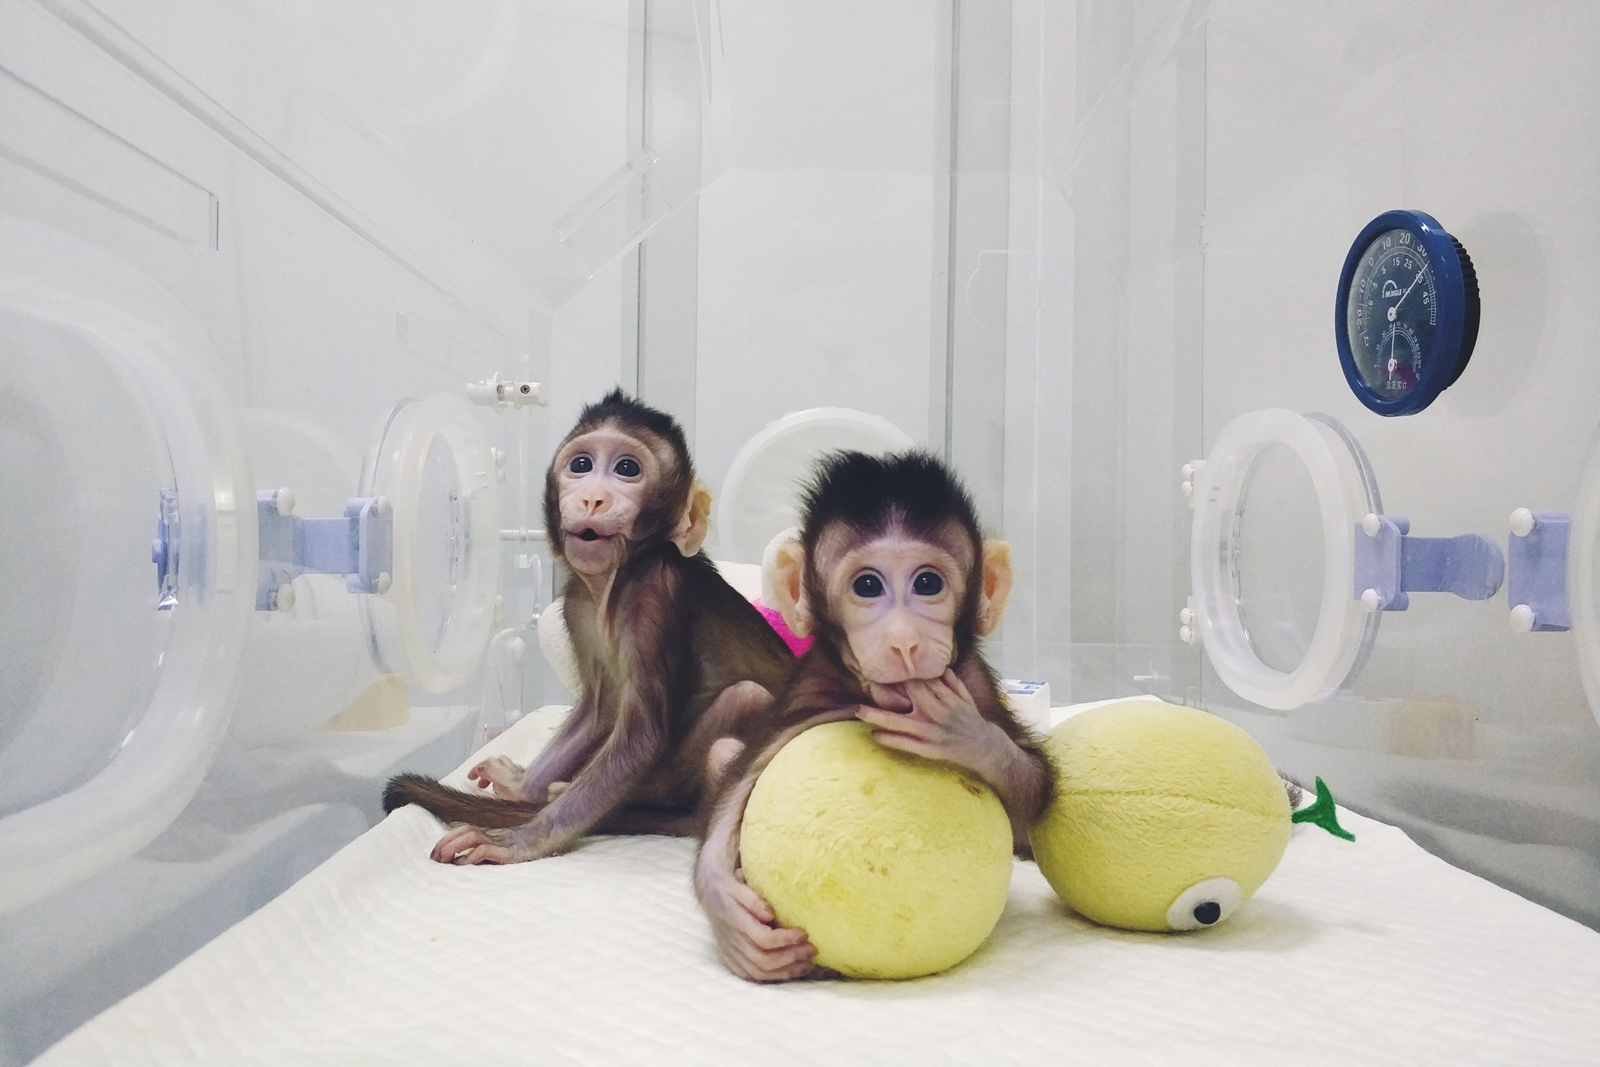 The two long-tailed macaques born at Shanghai in January 2018 were among the first primates to be cloned. | Photo: Institute of Neuroscience of Chinese Academy of Sciences